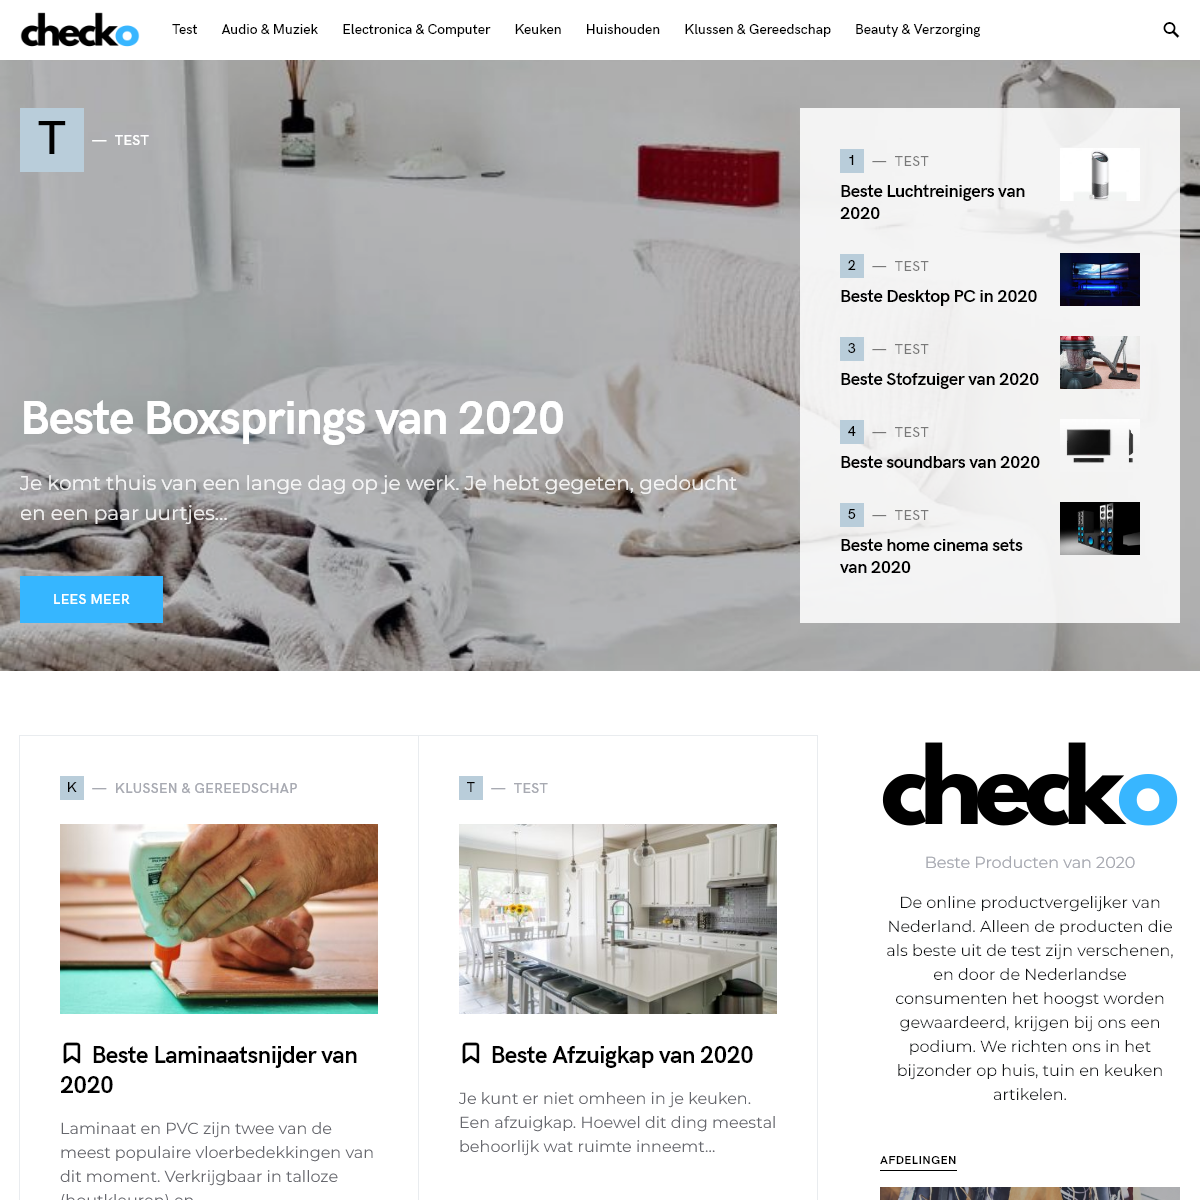 A complete backup of checko.nl